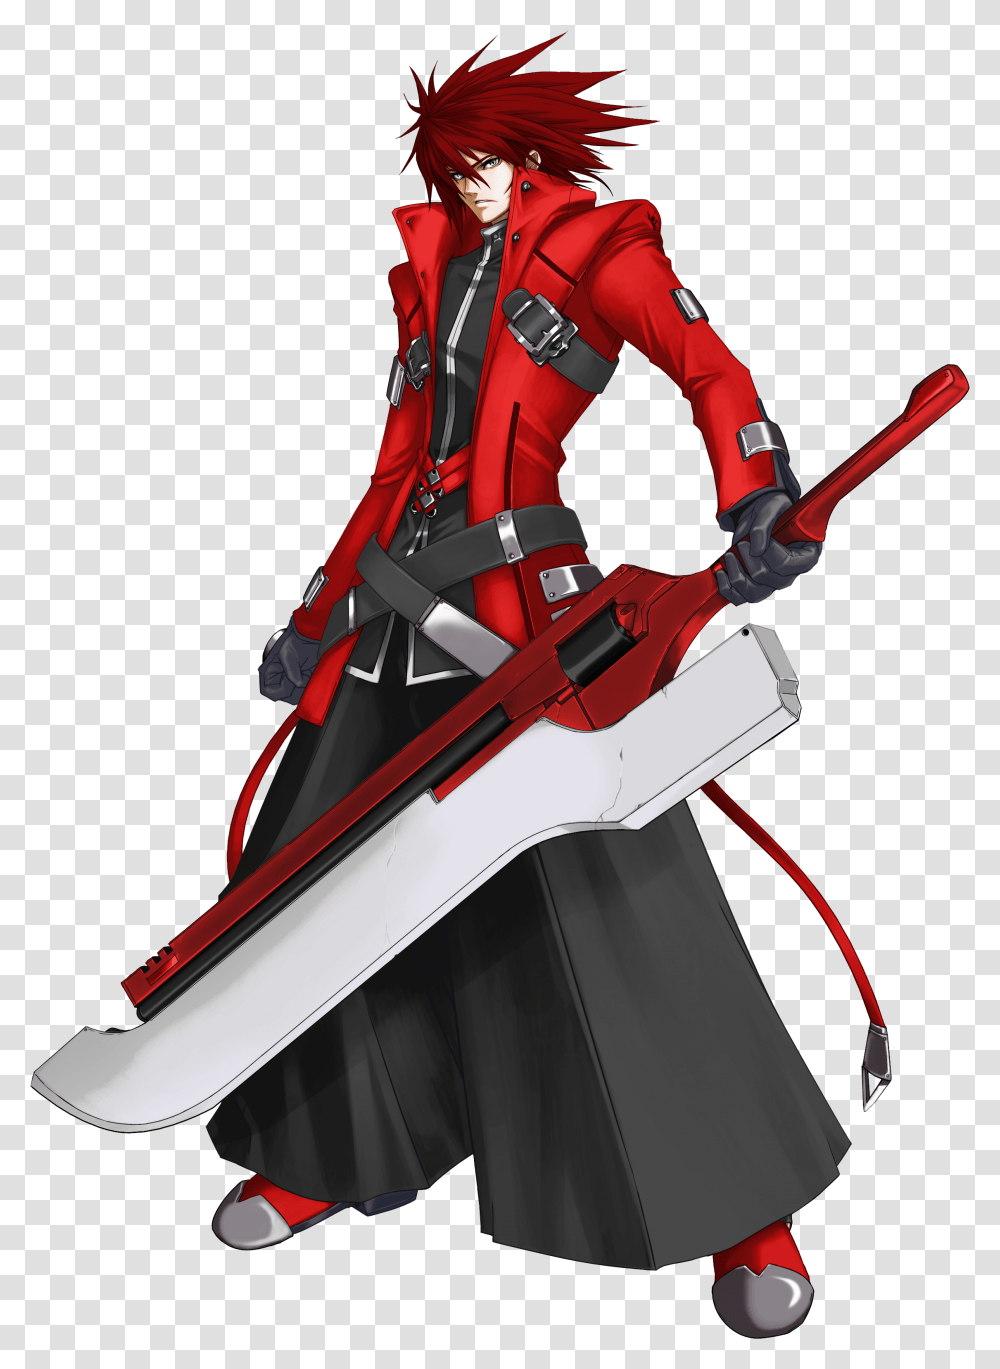 Rwby X Blazblue Ruby Rose Ragna The Bloodedge By Narayank Ragna The Bloodedge Sword, Person, Human, Bow, Samurai Transparent Png